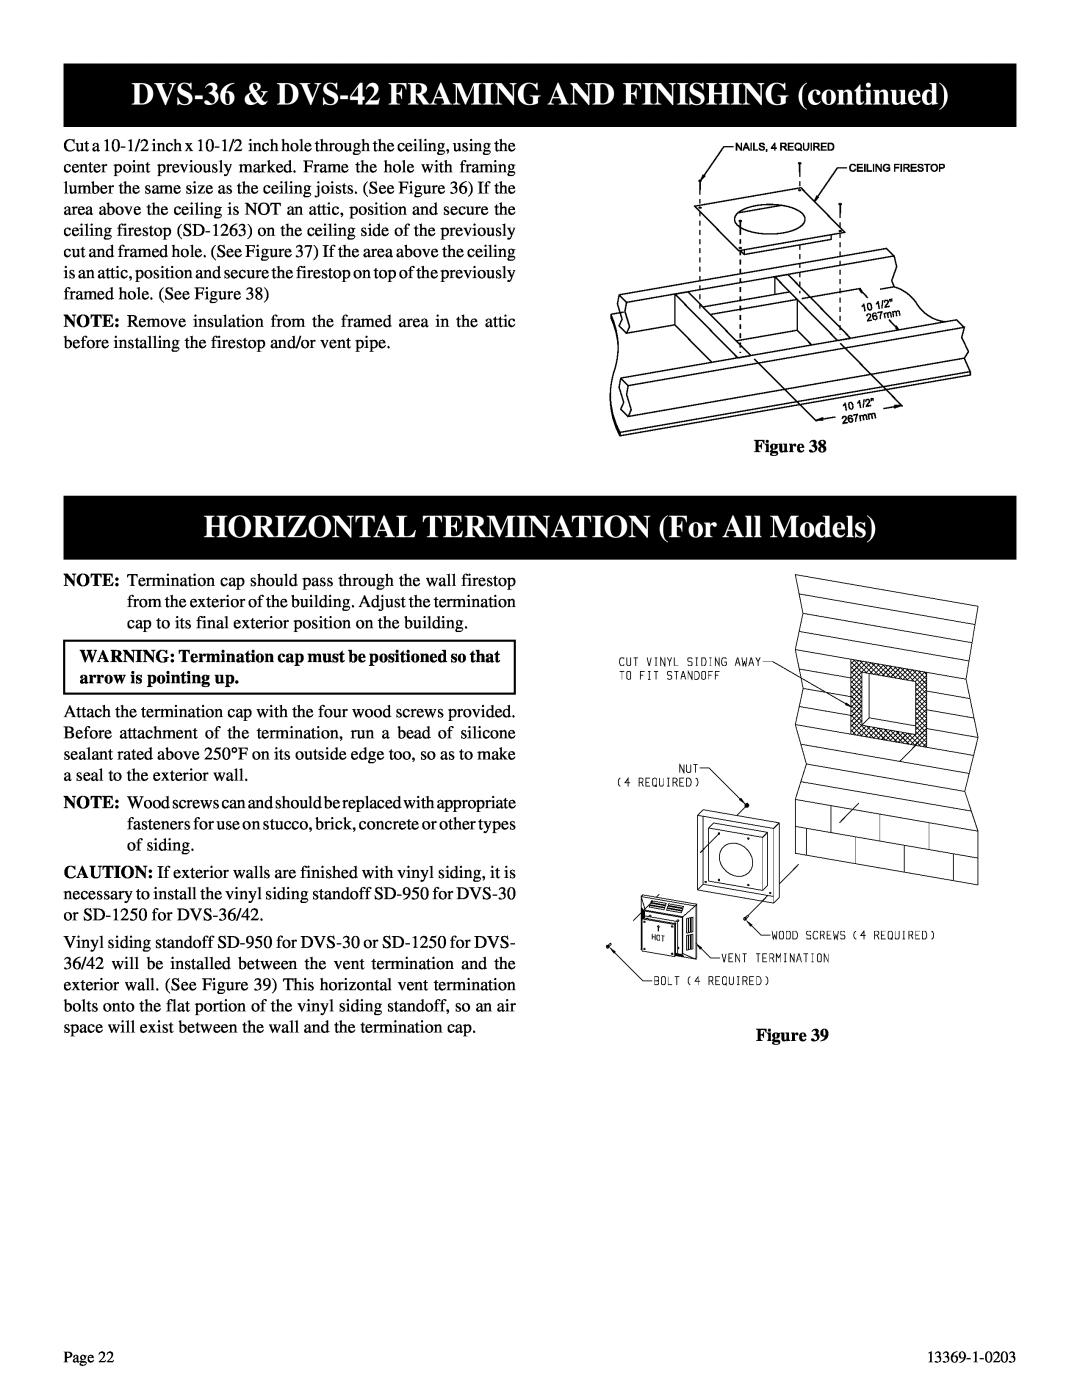 DVS 30-2 installation instructions DVS-36& DVS-42FRAMING AND FINISHING continued, HORIZONTAL TERMINATION For All Models 